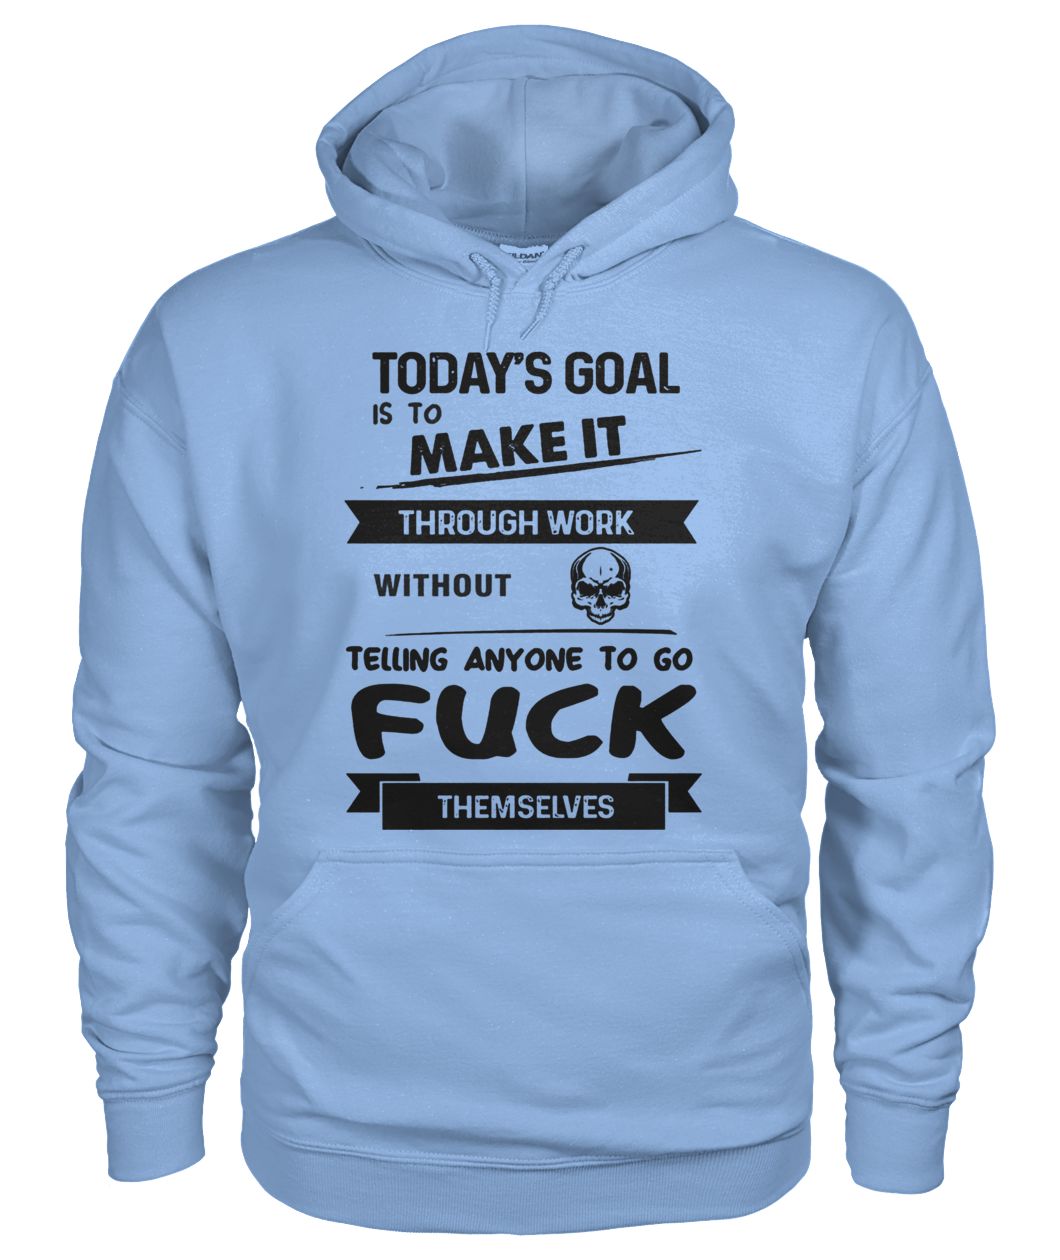 Today's goal is to make it through work without telling anyone to go fuck themselves hoodie